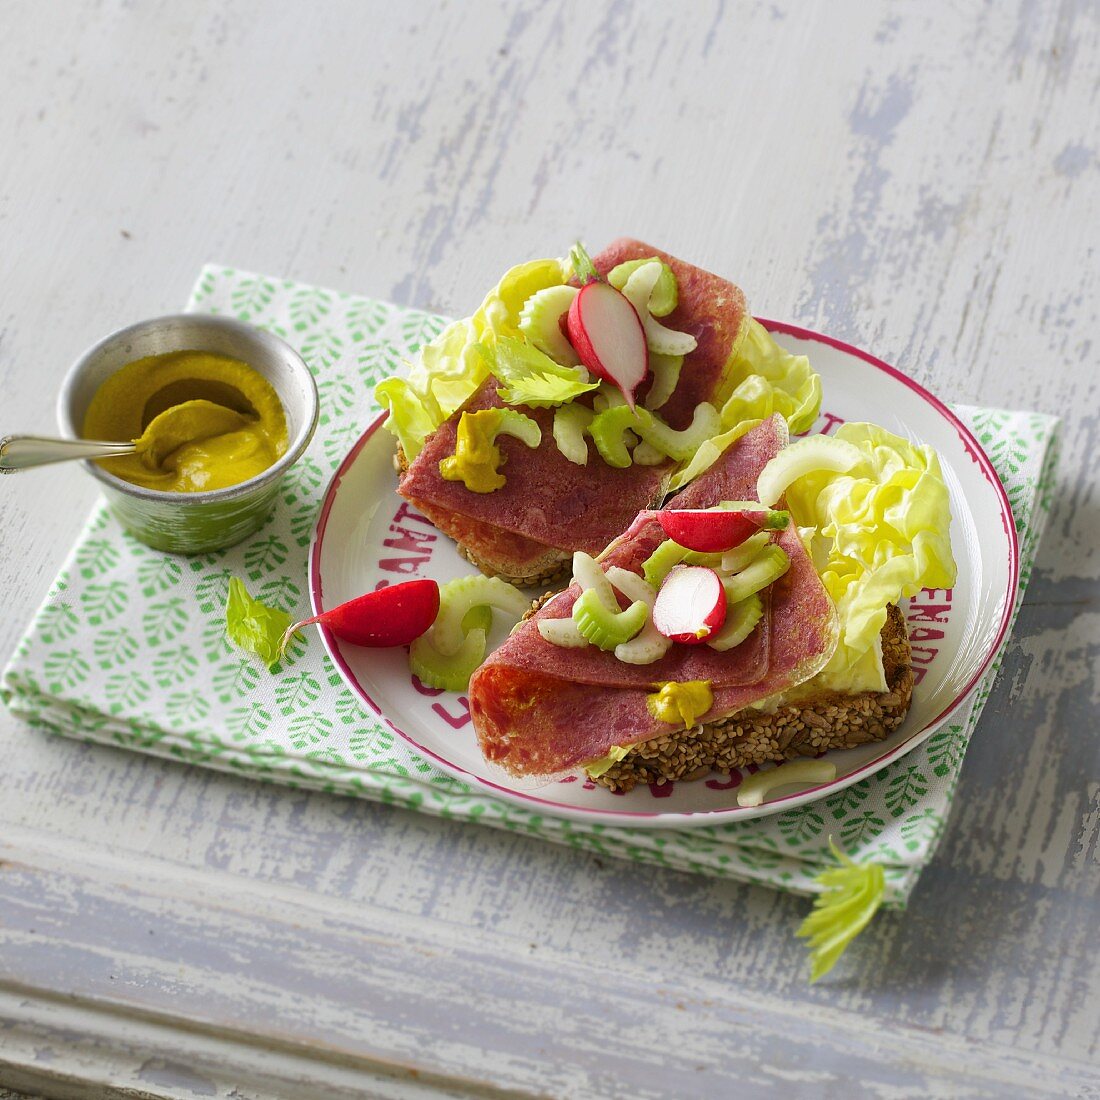 A corned beef sandwich with celery and radishes